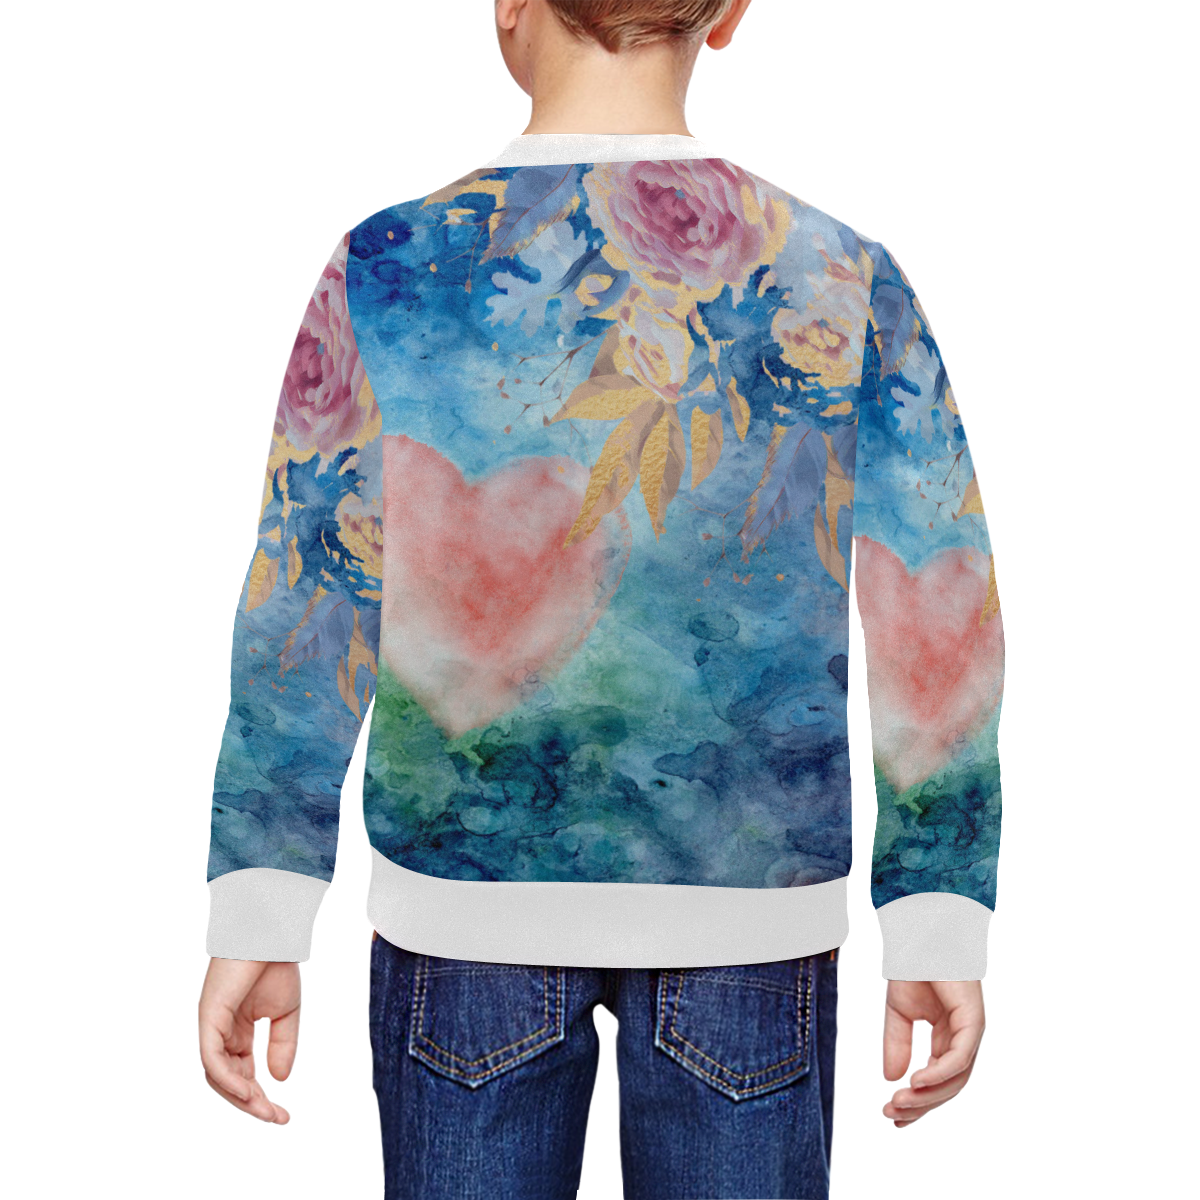 Heart and Flowers - Pink and Blue All Over Print Crewneck Sweatshirt for Kids (Model H29)